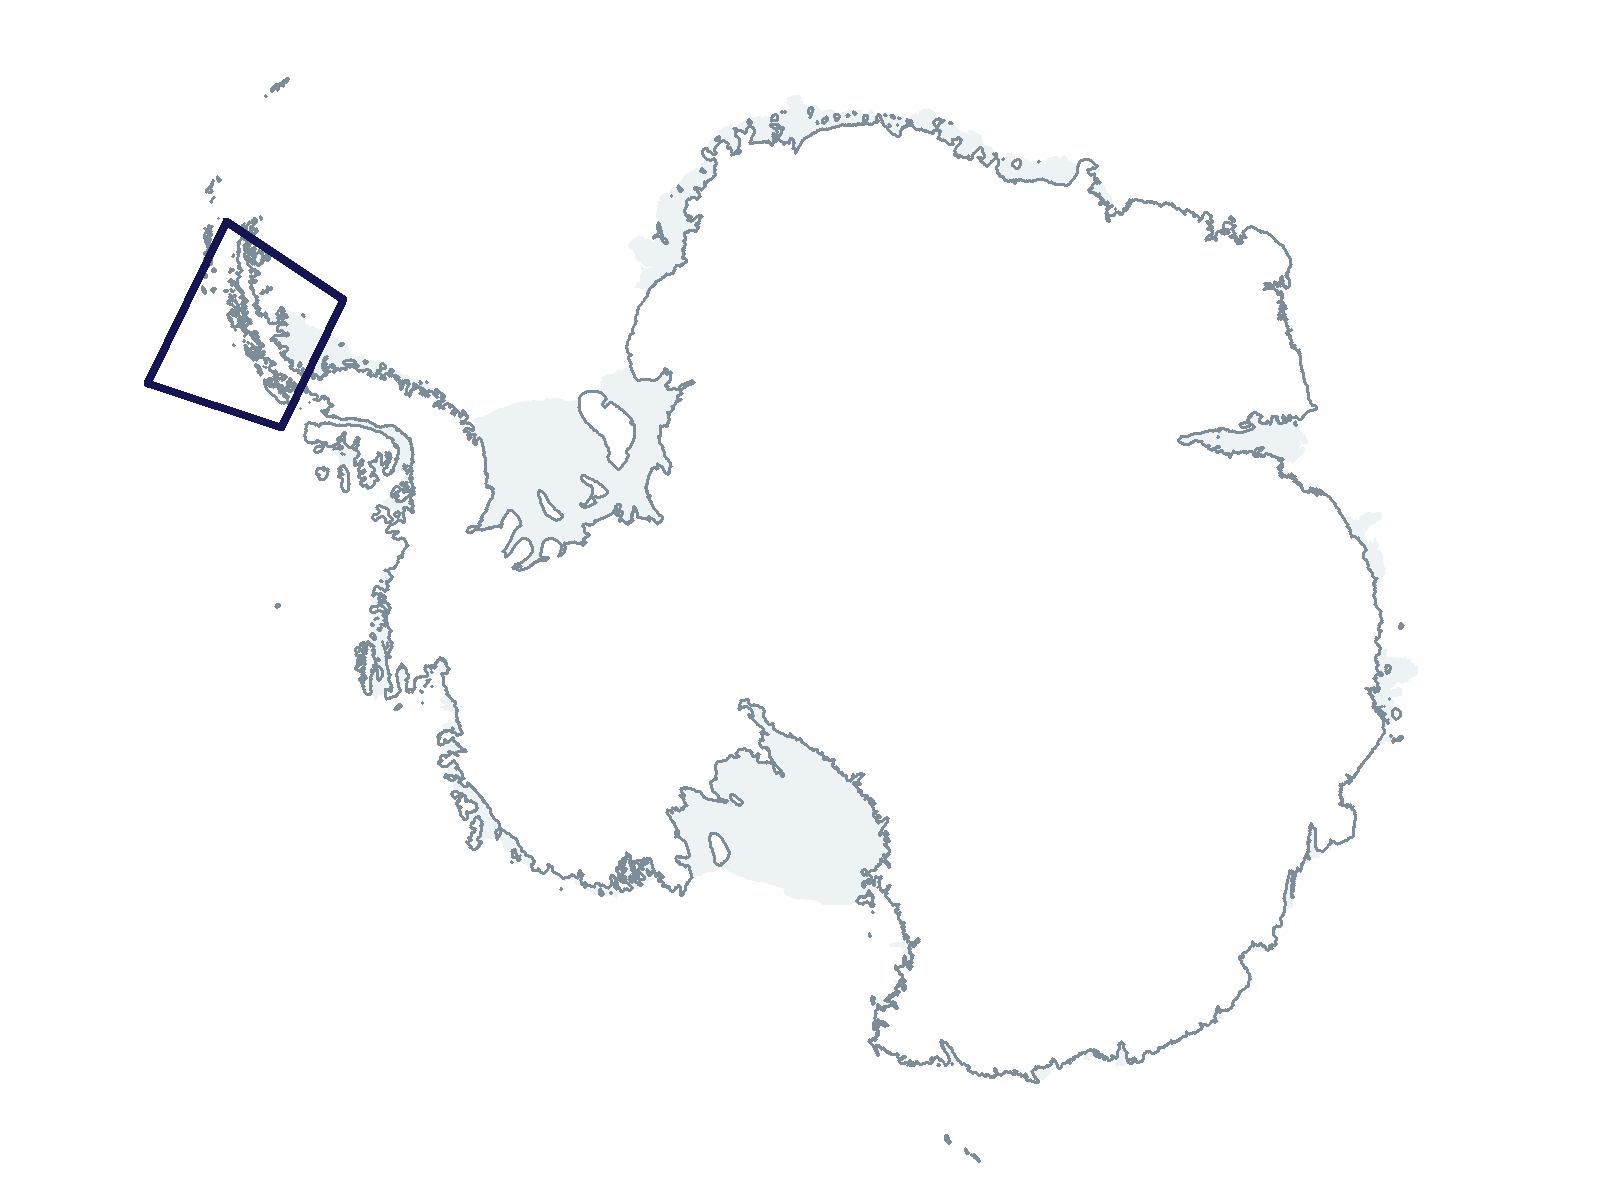 B-038-L Research Location(s): Bransfield Strait and Marguerite Bay